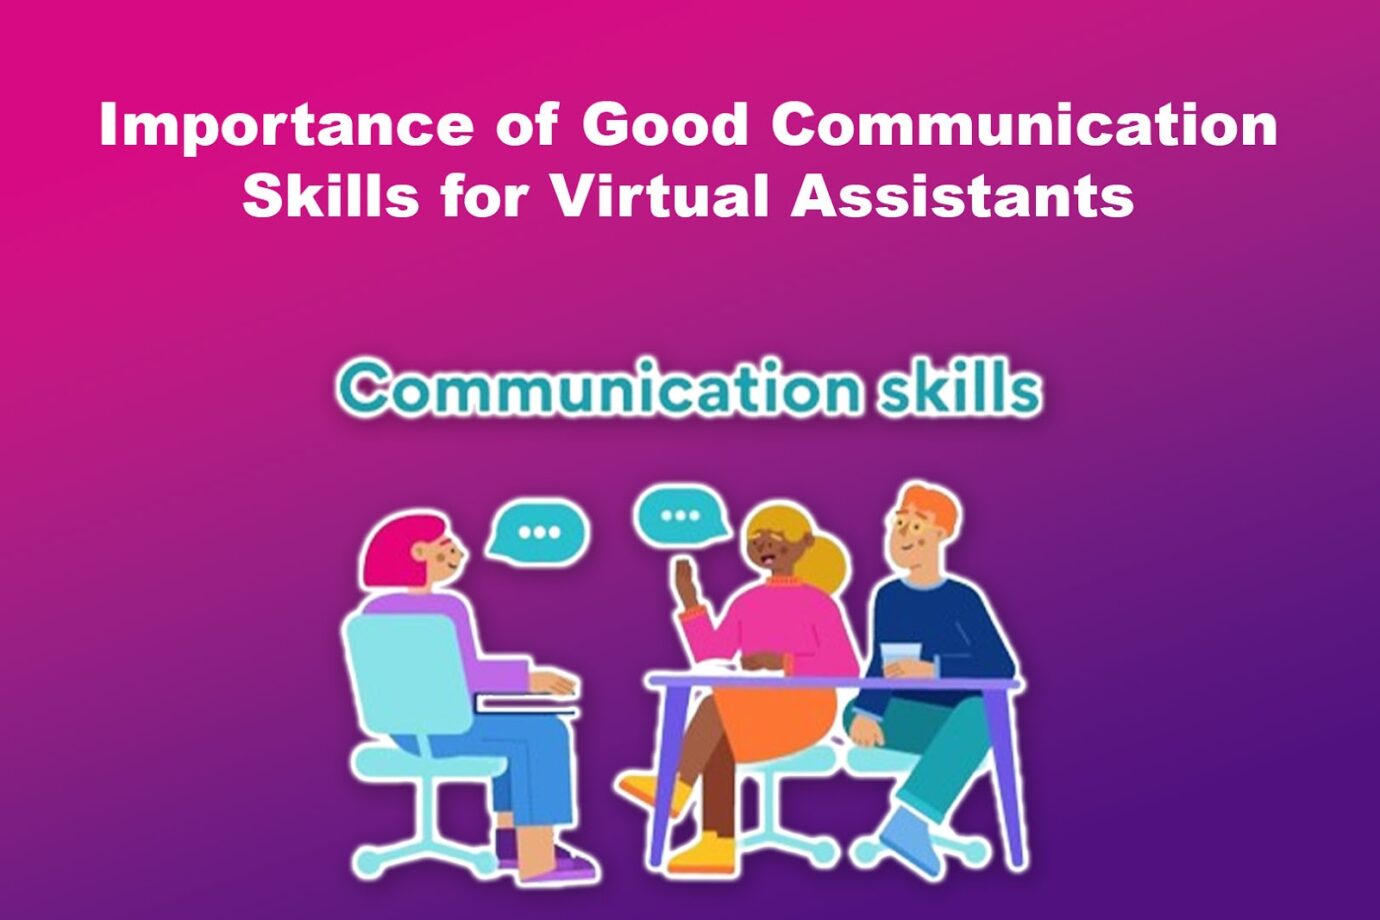 Importance of Good Communication Skills for Virtual Assistants